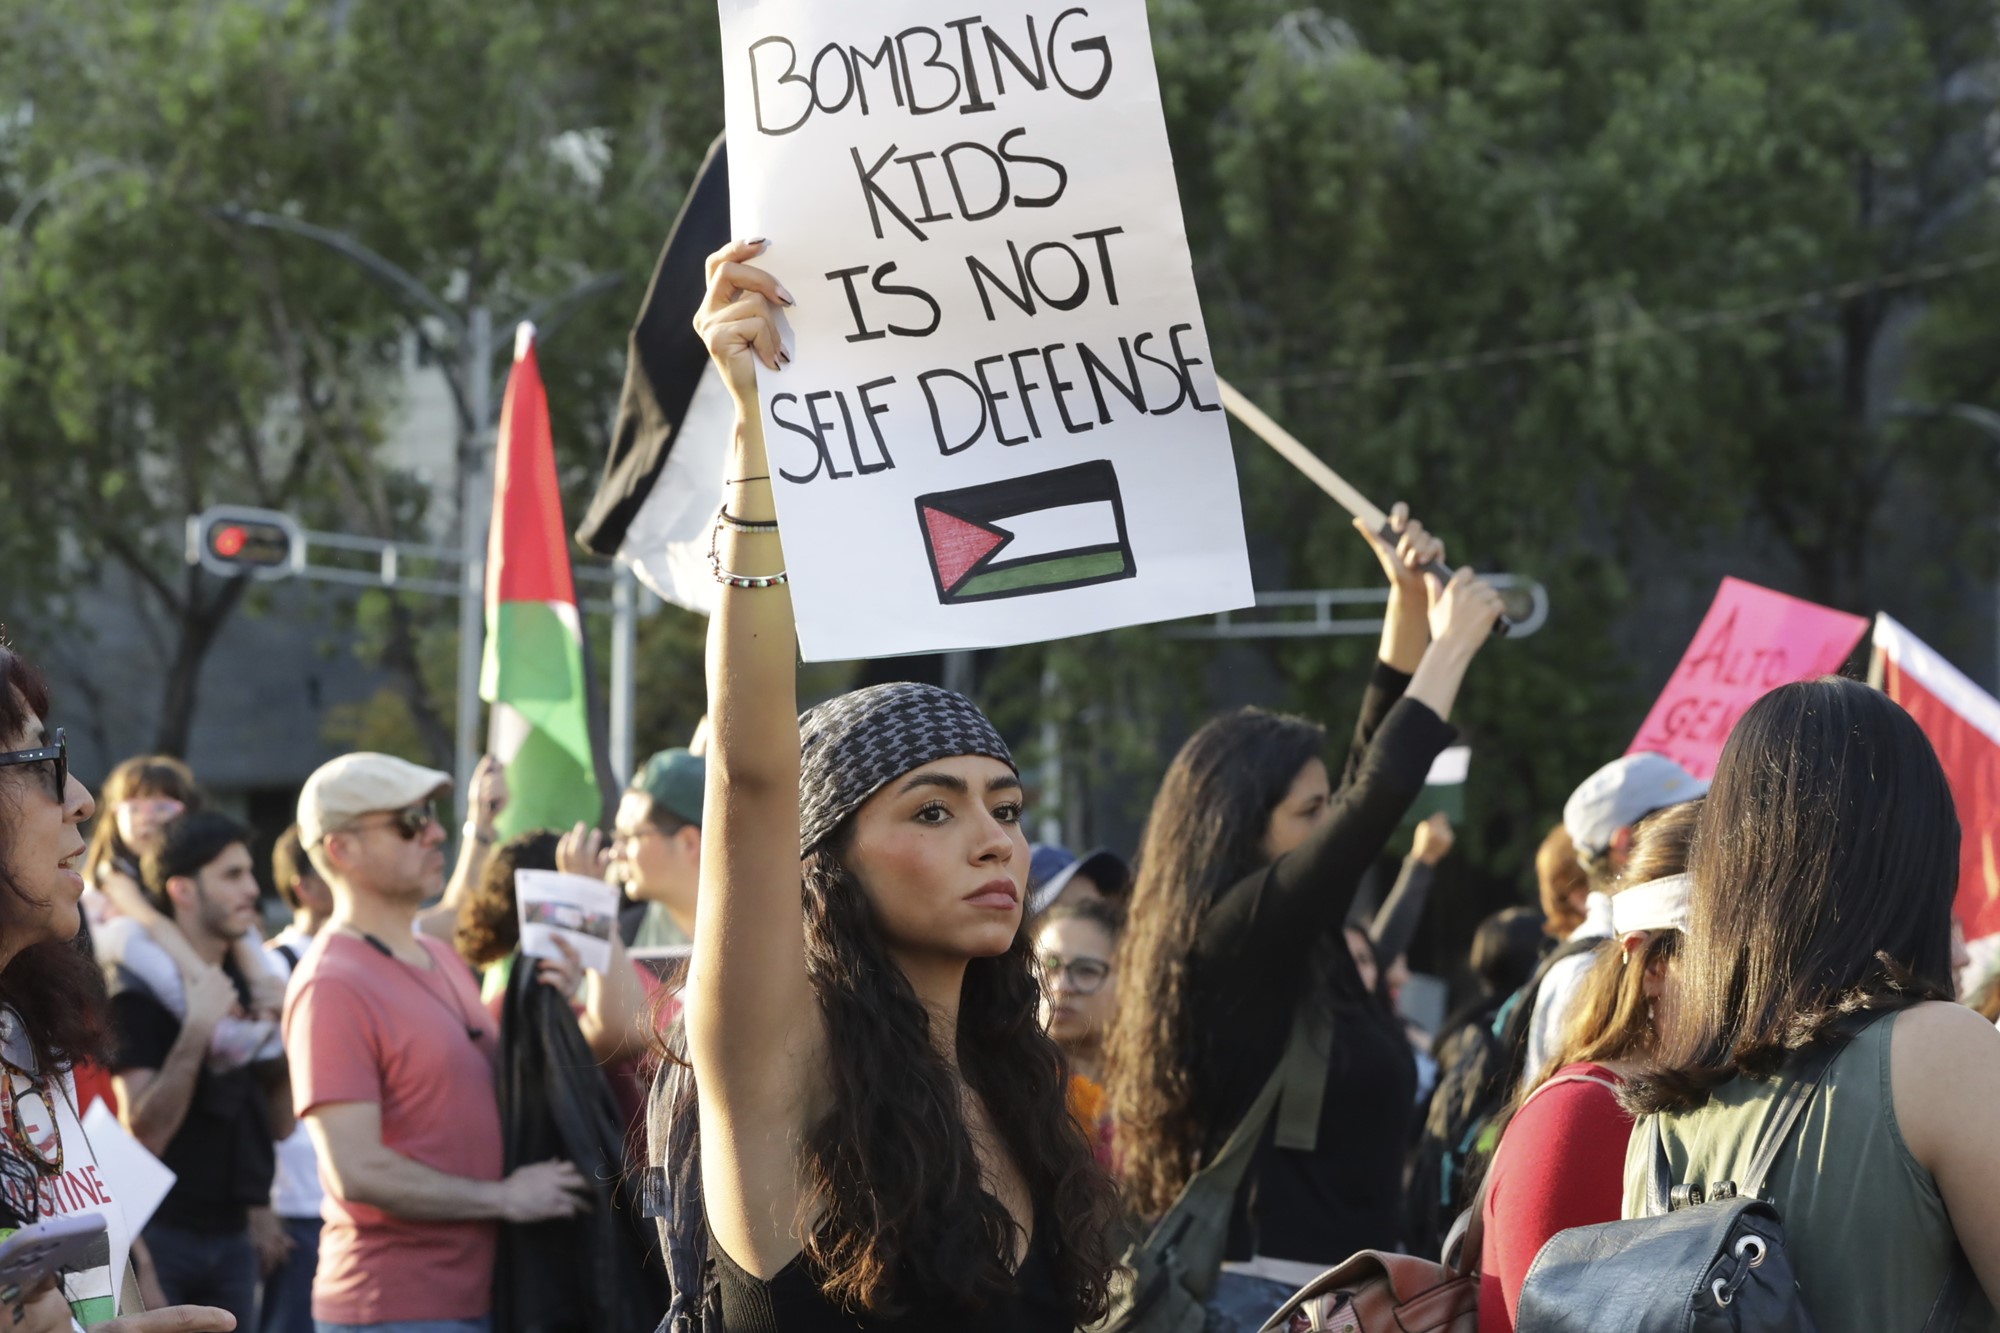 A young woman holds a sign that reads "bombing kids is not self defense" with a Palestinian flag drawn underneath